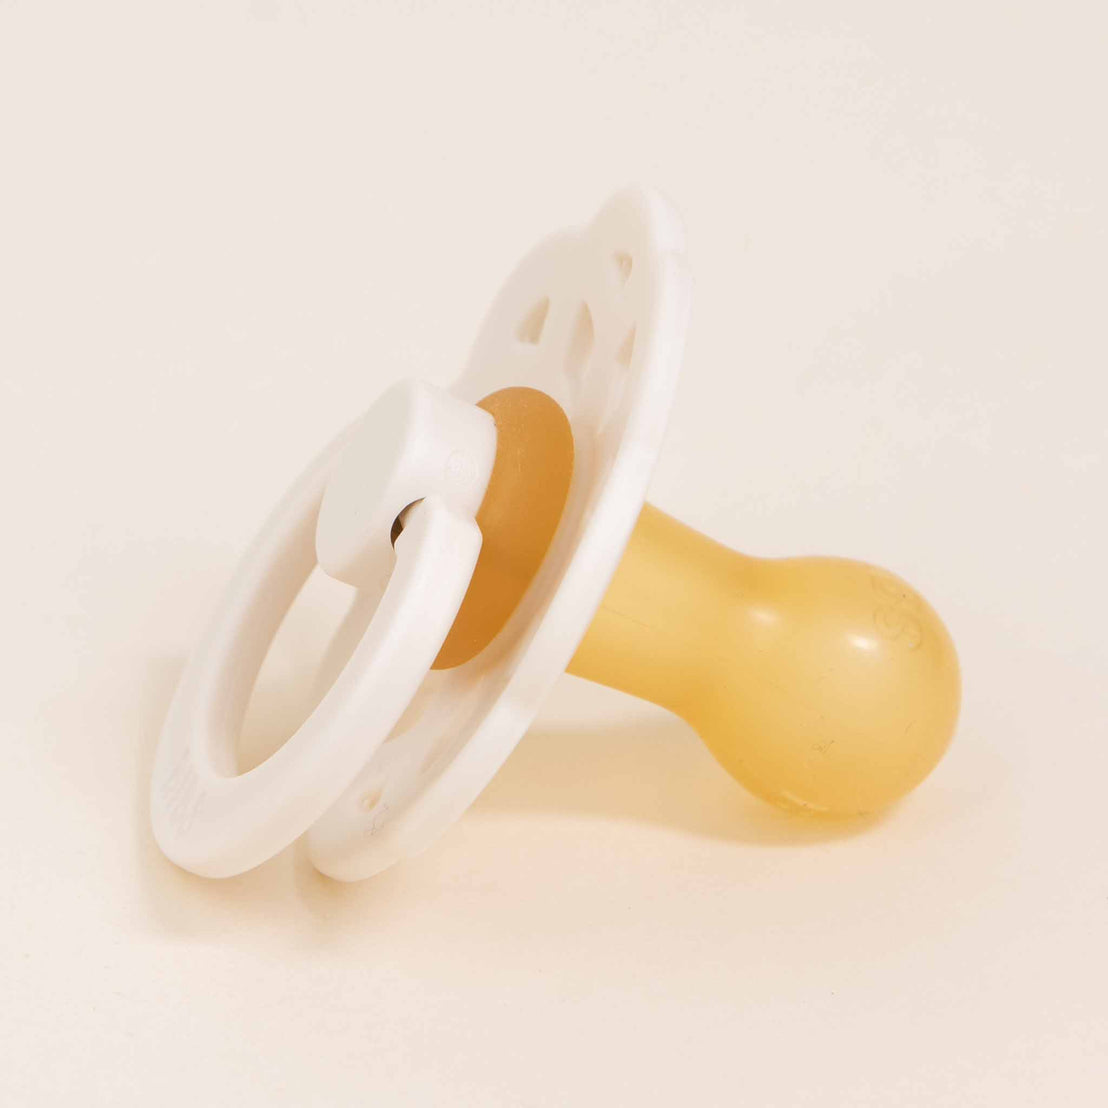 A Bibs Lace Pacifier in Ivory with a yellow nipple and white handle, designed in Denmark, set against a soft beige background.